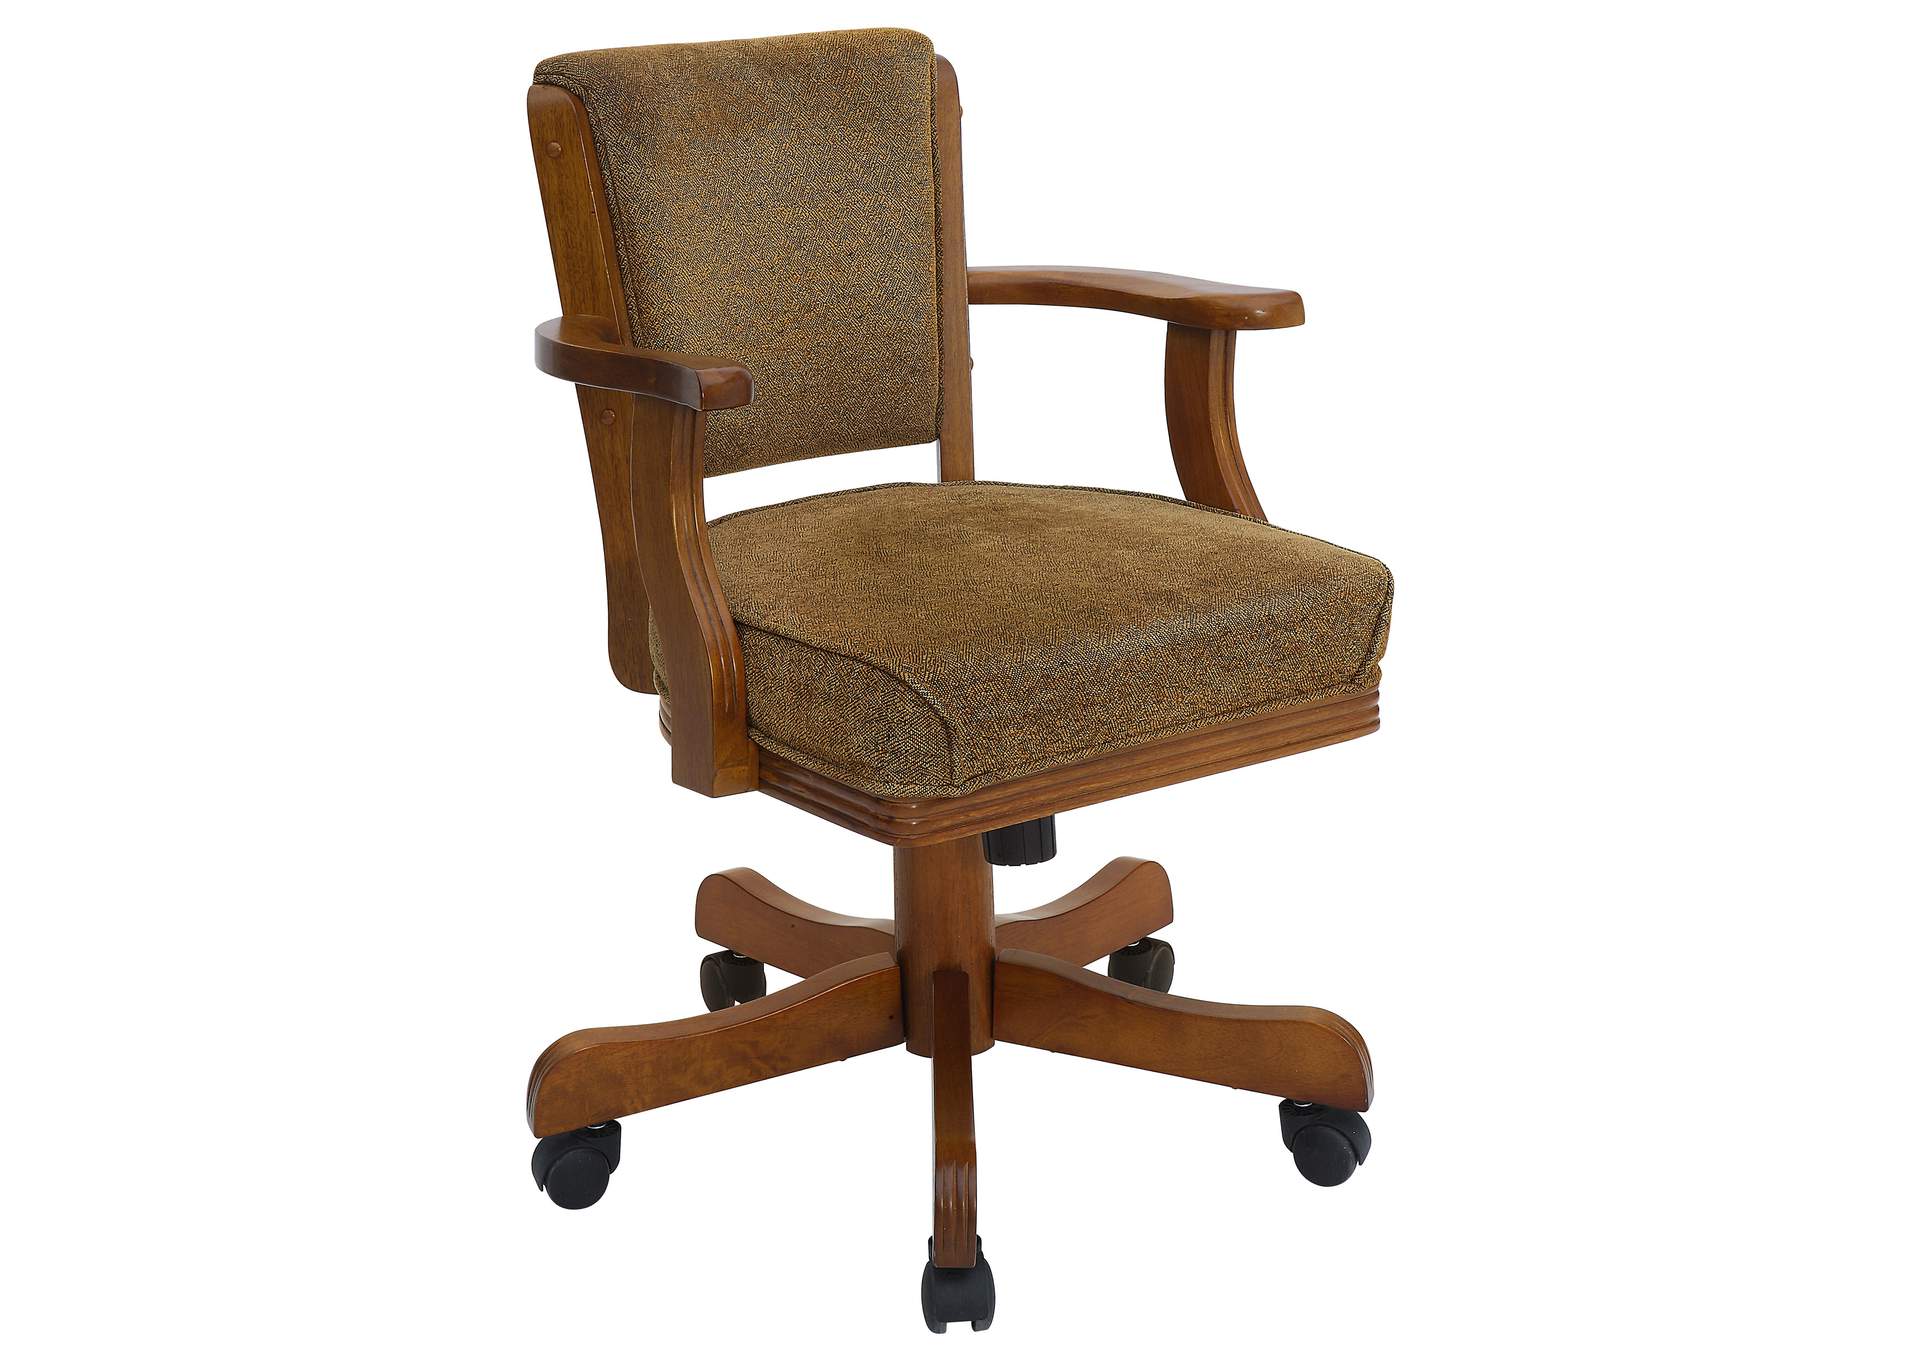 Mitchell Upholstered Game Chair Olive-brown and Amber,Coaster Furniture